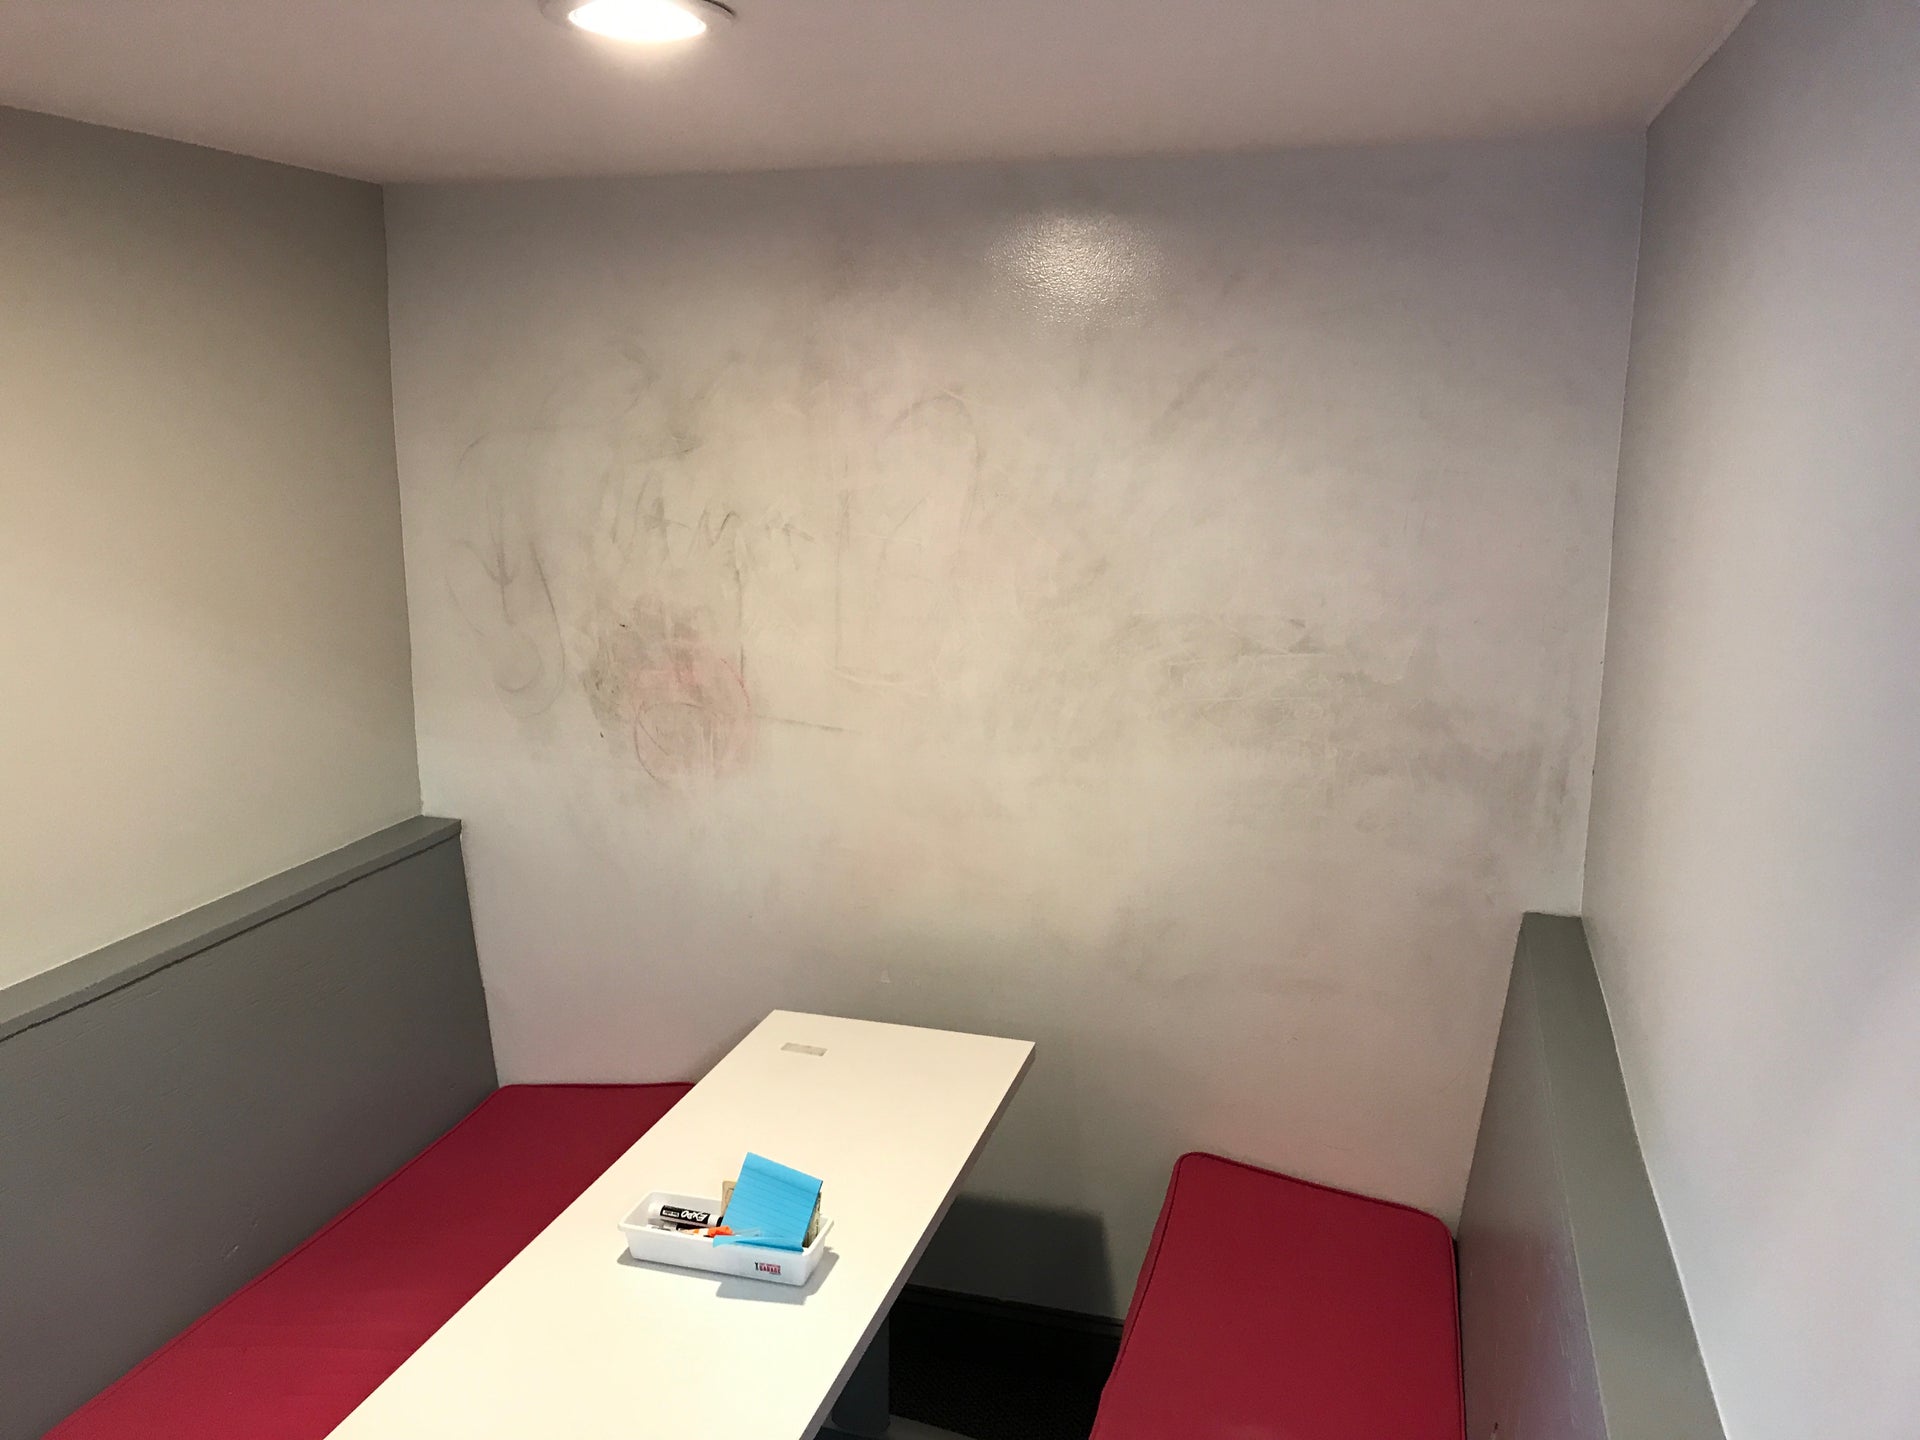 Five Reasons Why People AVOID Whiteboard Paint